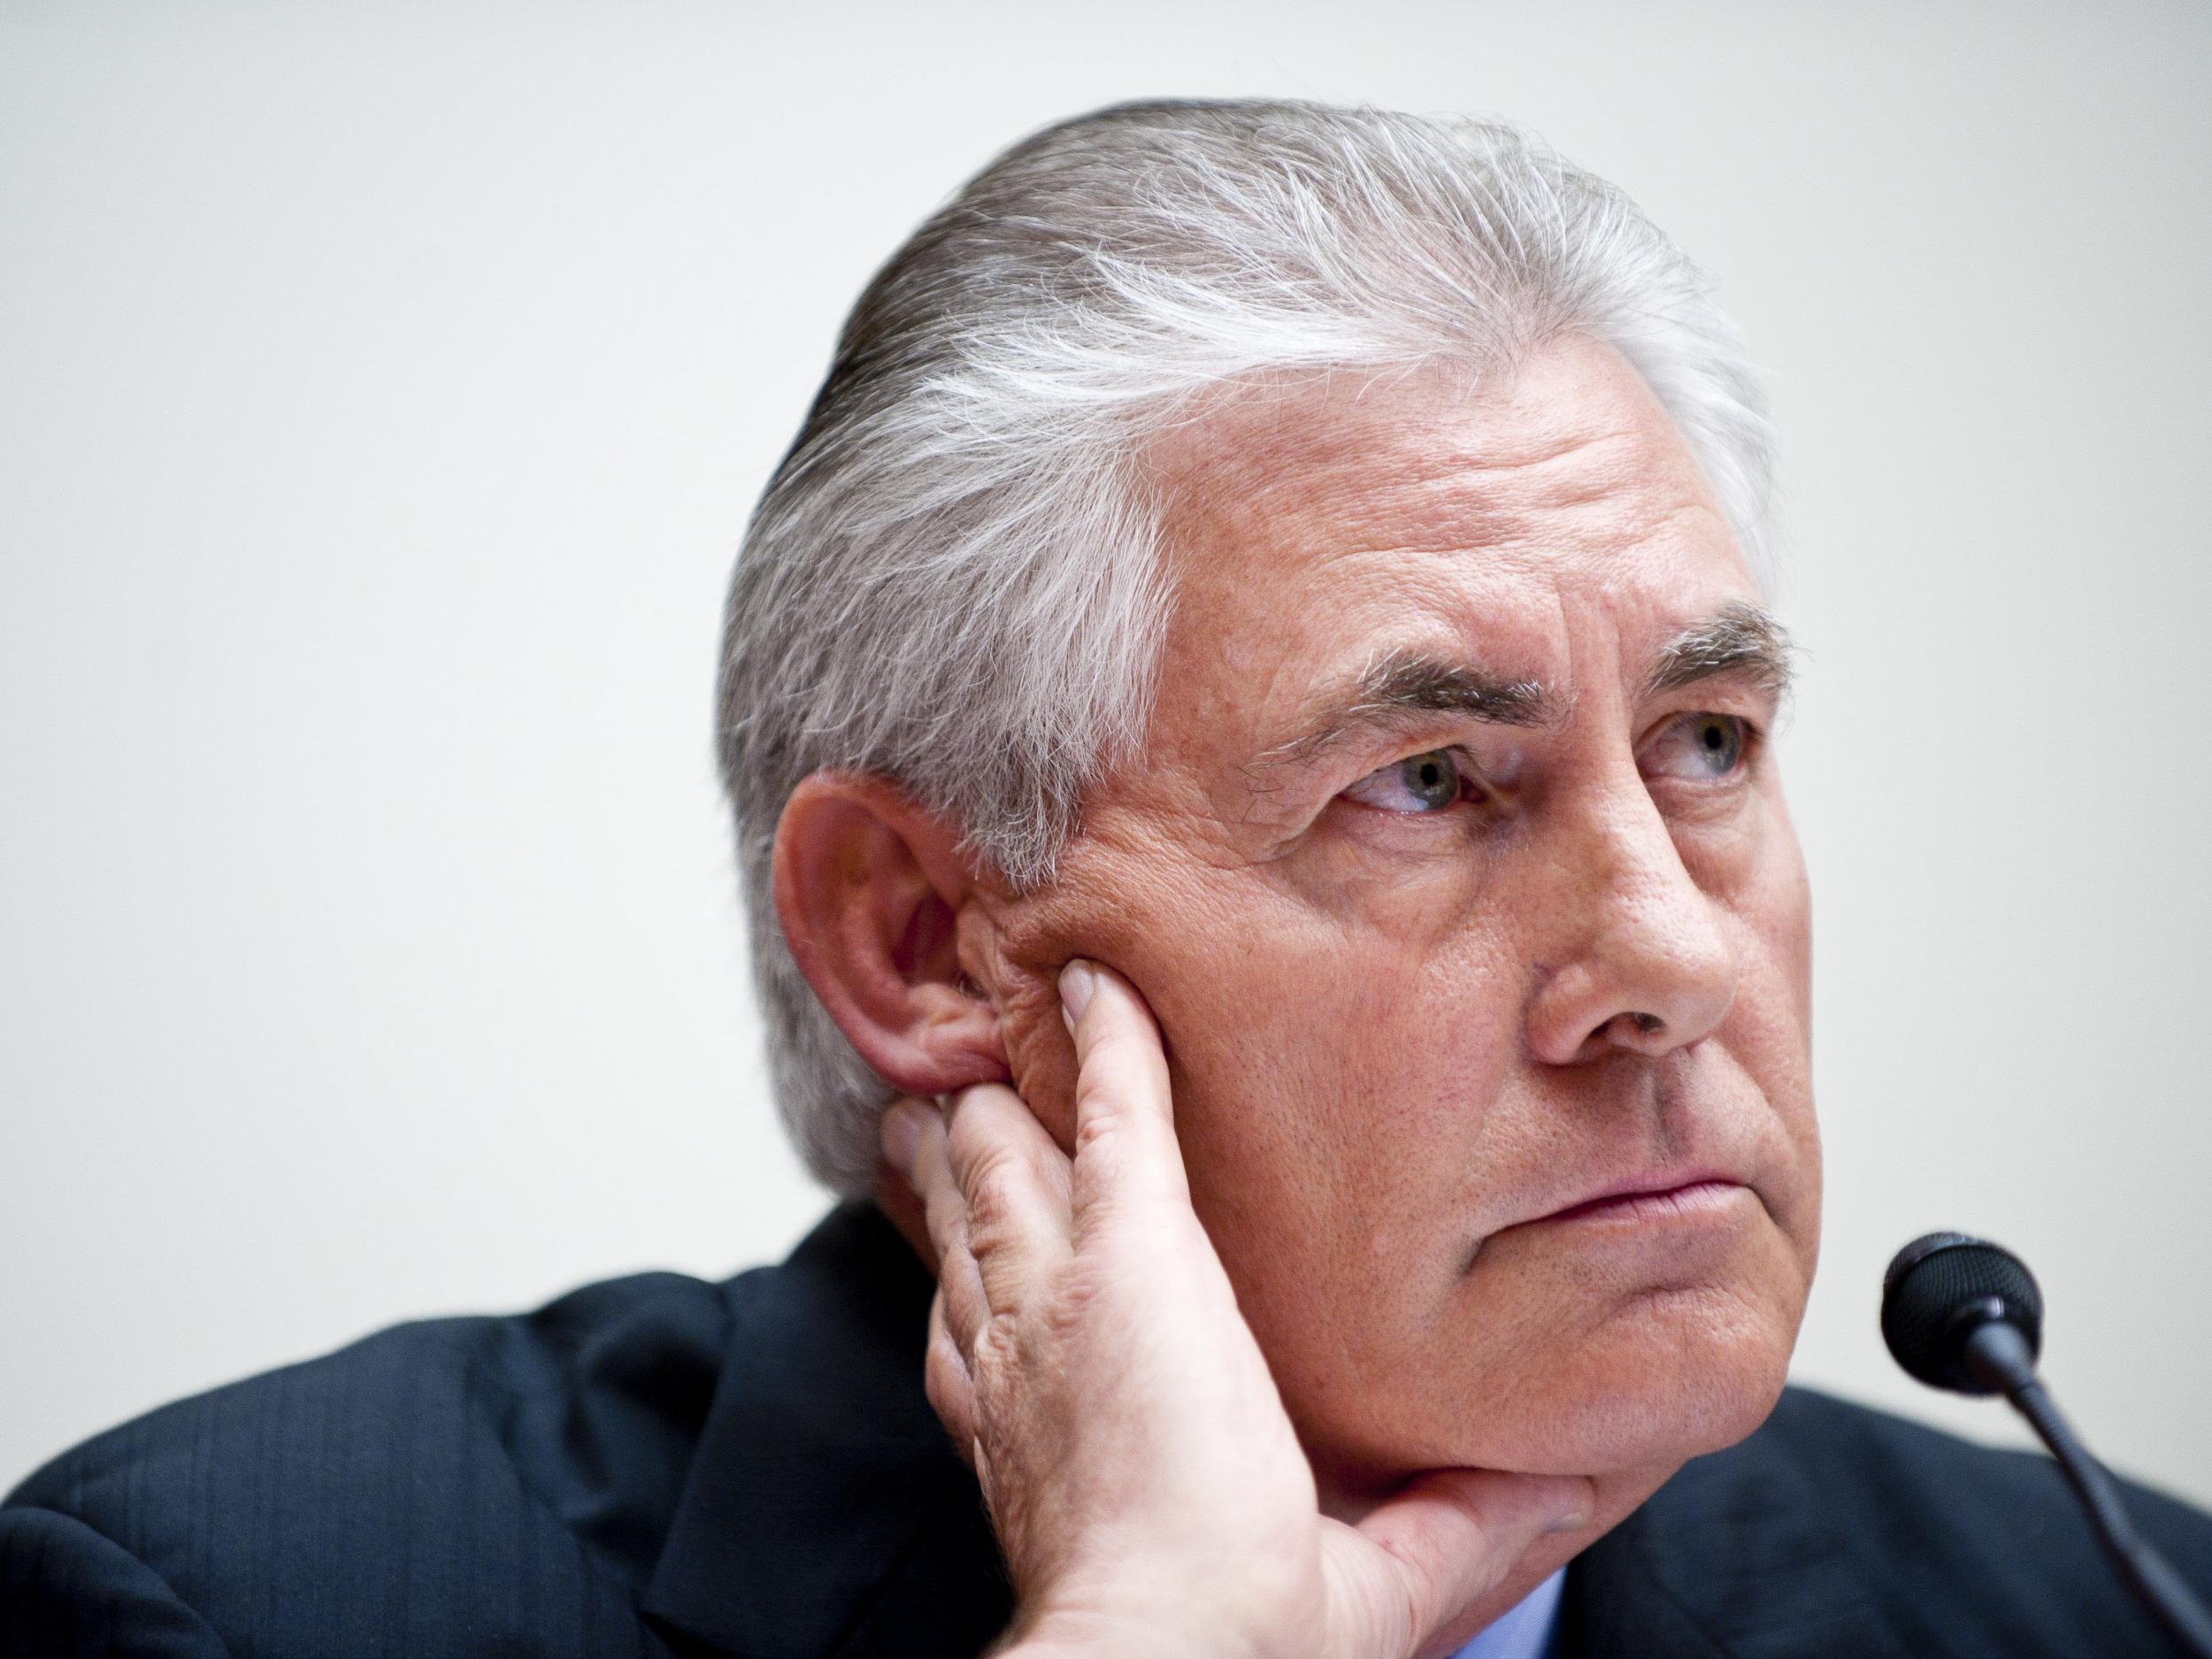 Tillerson has shares in Exxon worth more than $200 million - and they are likely to surge in value if sanctions are lifted from Russia